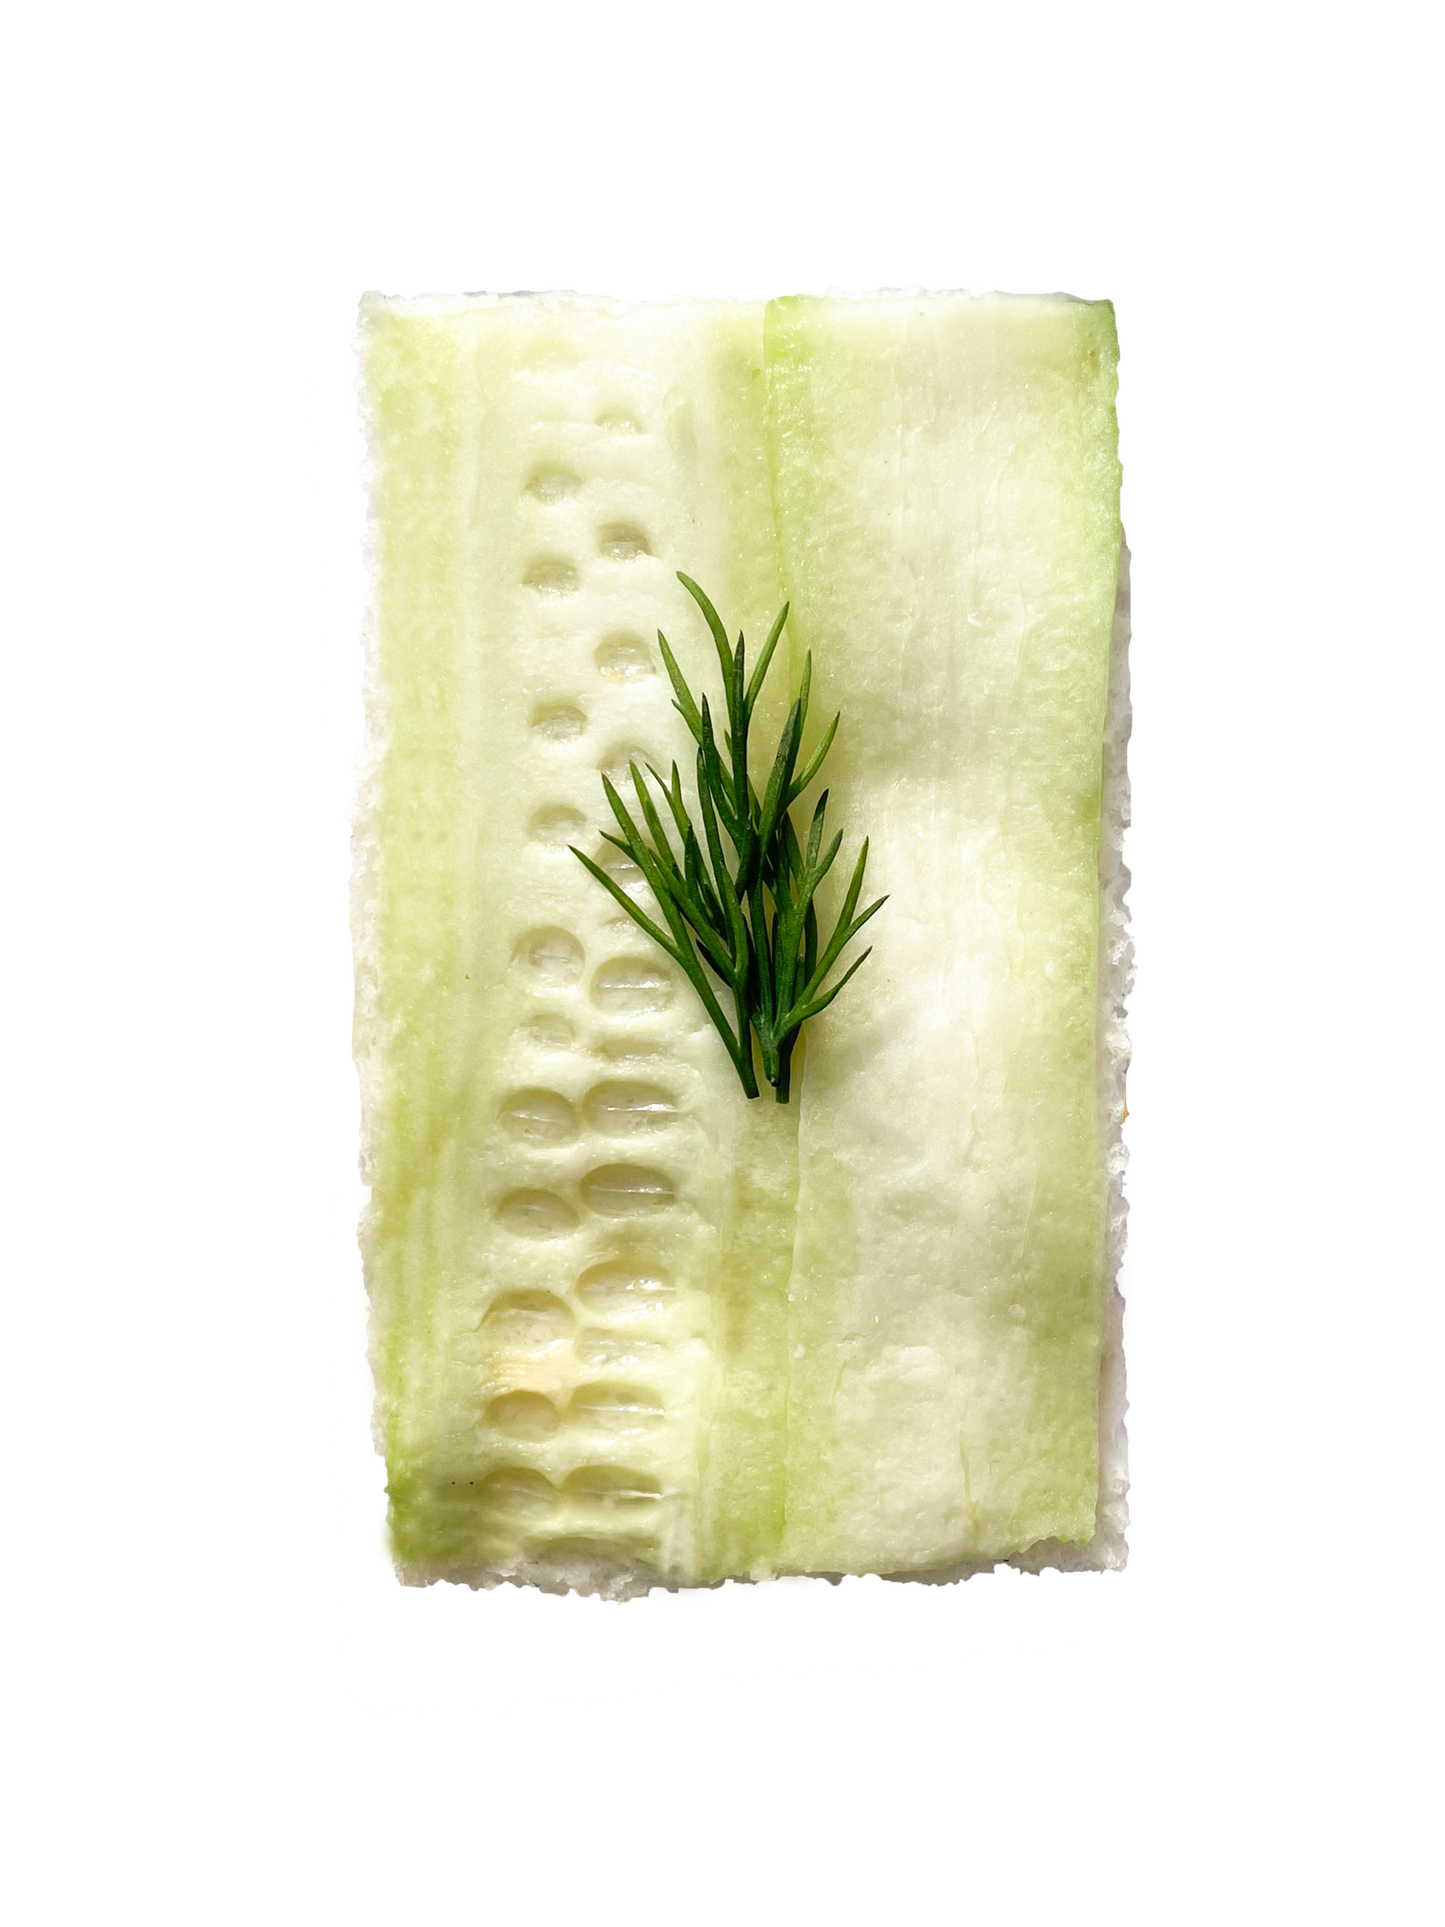 cucumber tea sandwich topped with cucumber slice and dill